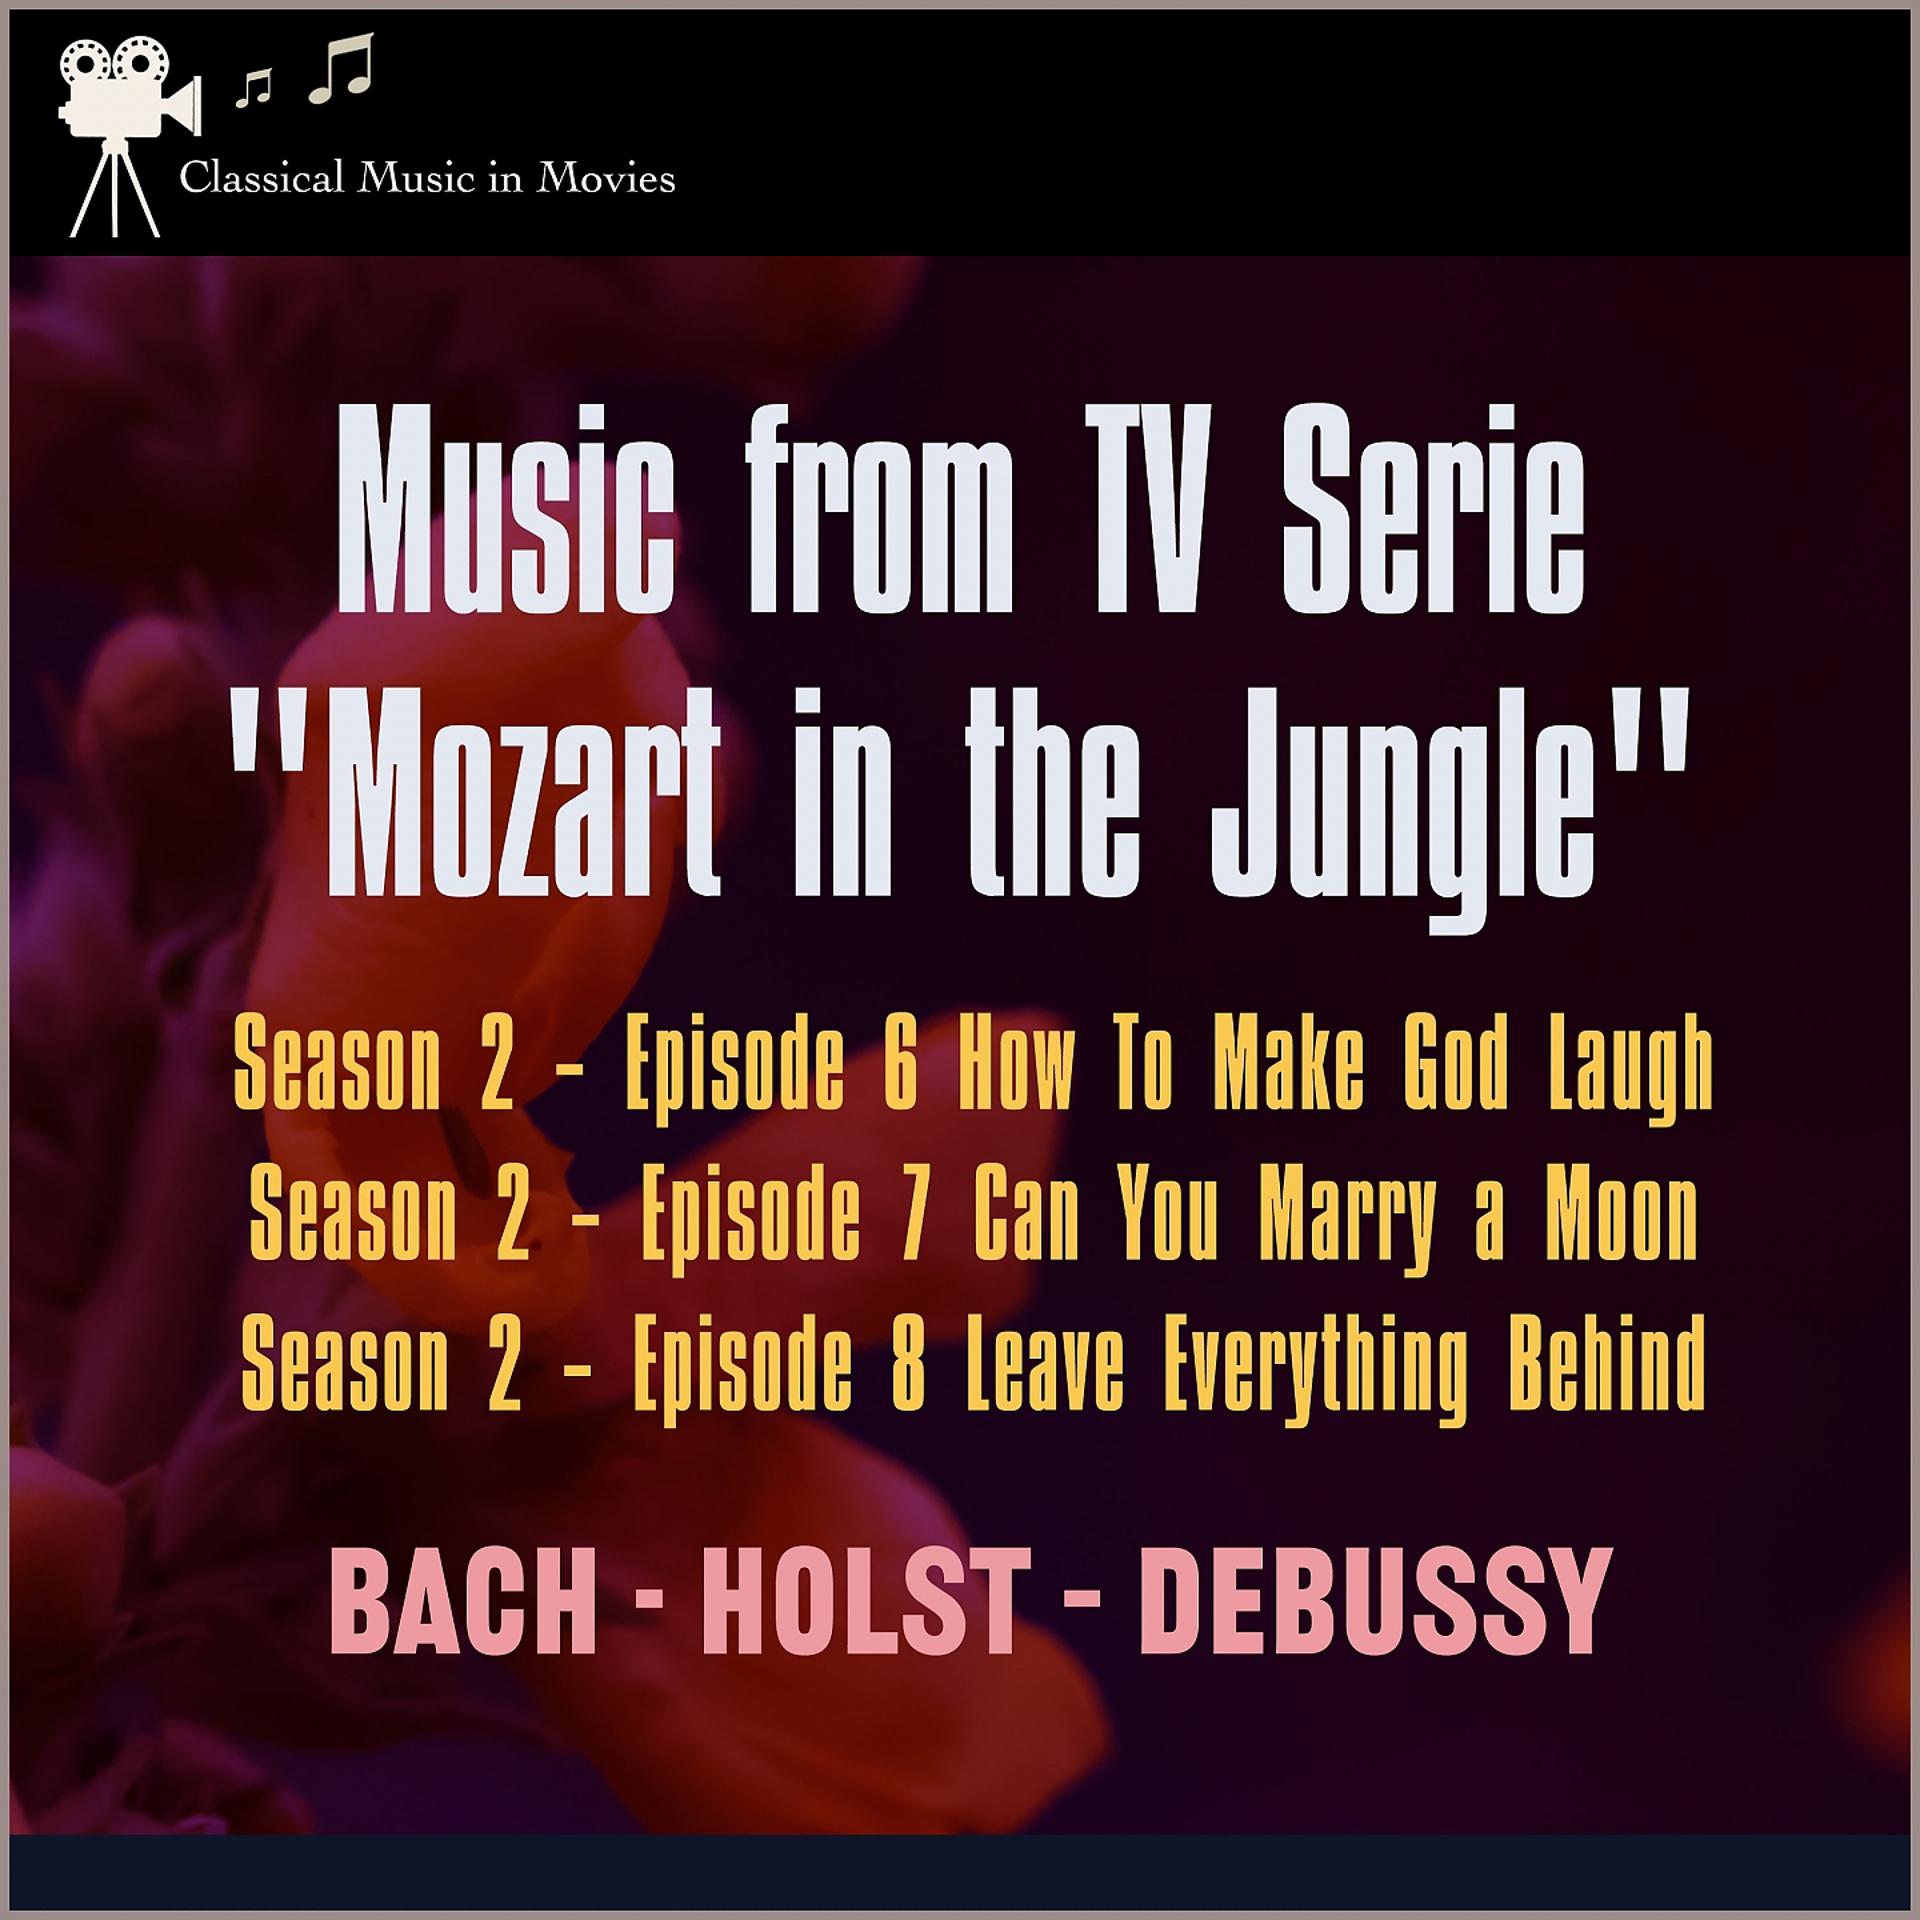 Постер альбома Music from Tv Serie: "Mozart in the Jungel" S2, E6 How to Make God Laugh - S2, E7 Can You Marry a Moon - S2, E8 Leave Everything Behind